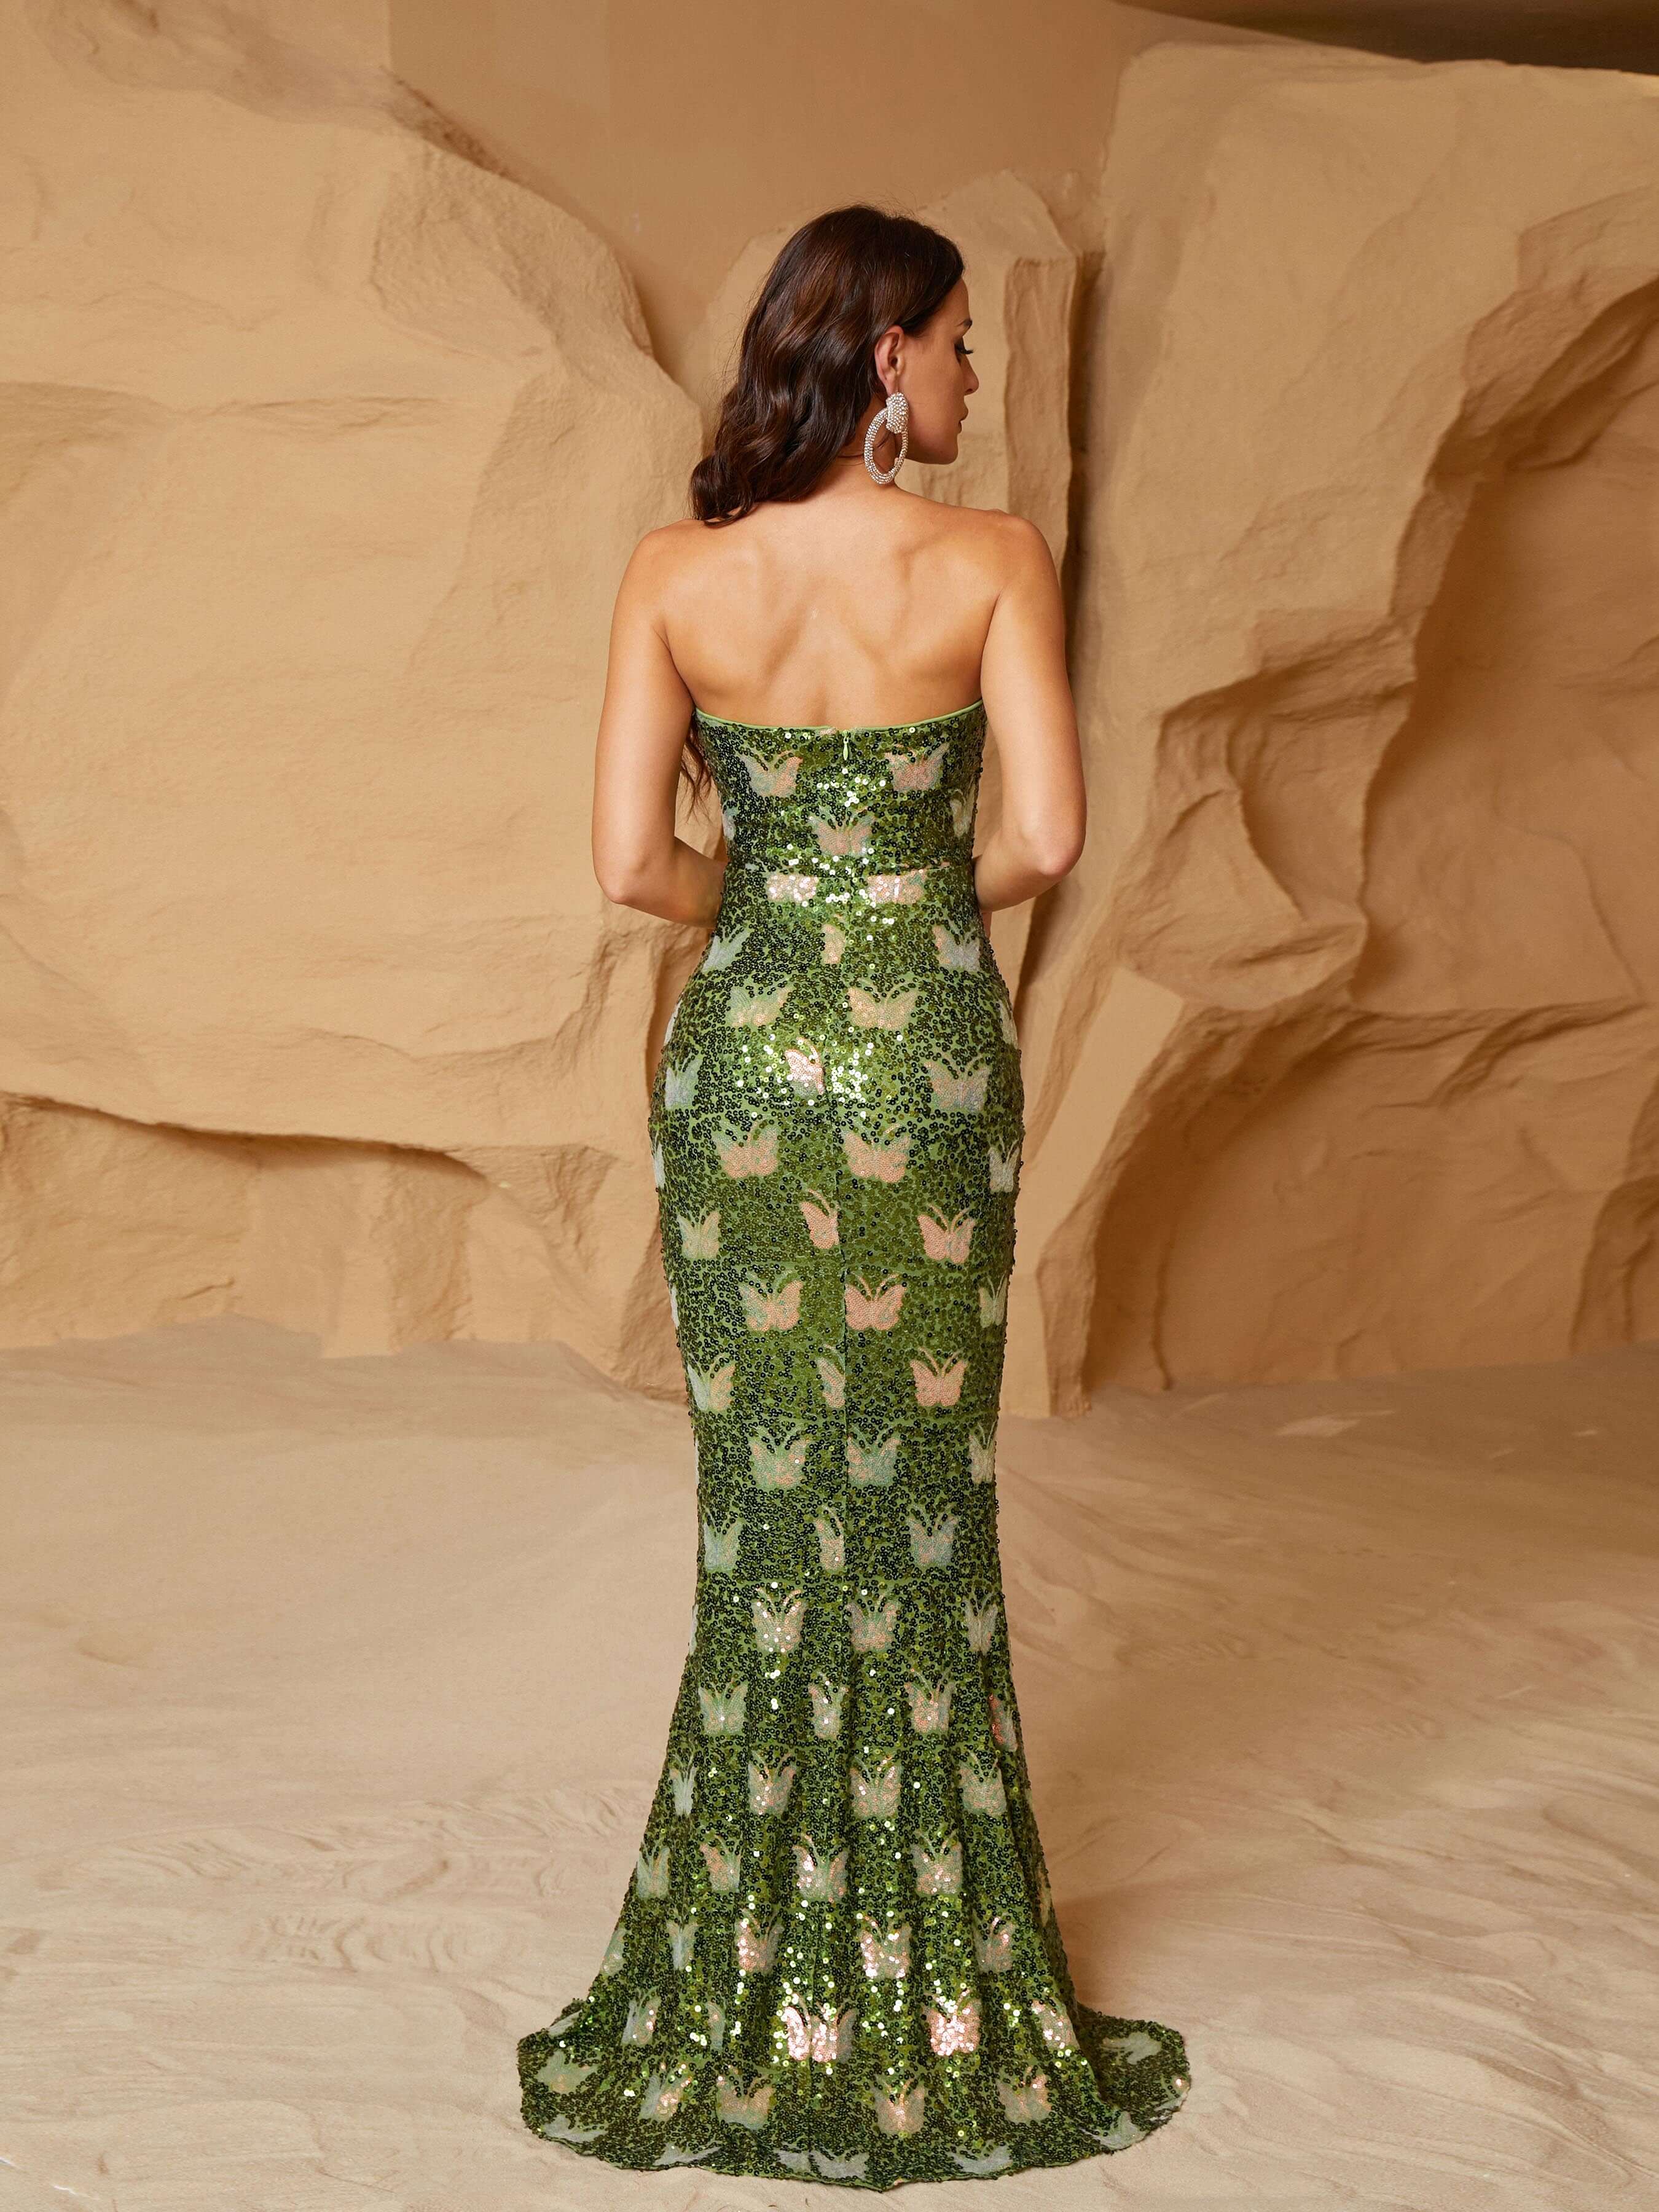 Tube Top Backless Green Sequin Prom Dress RJ10988